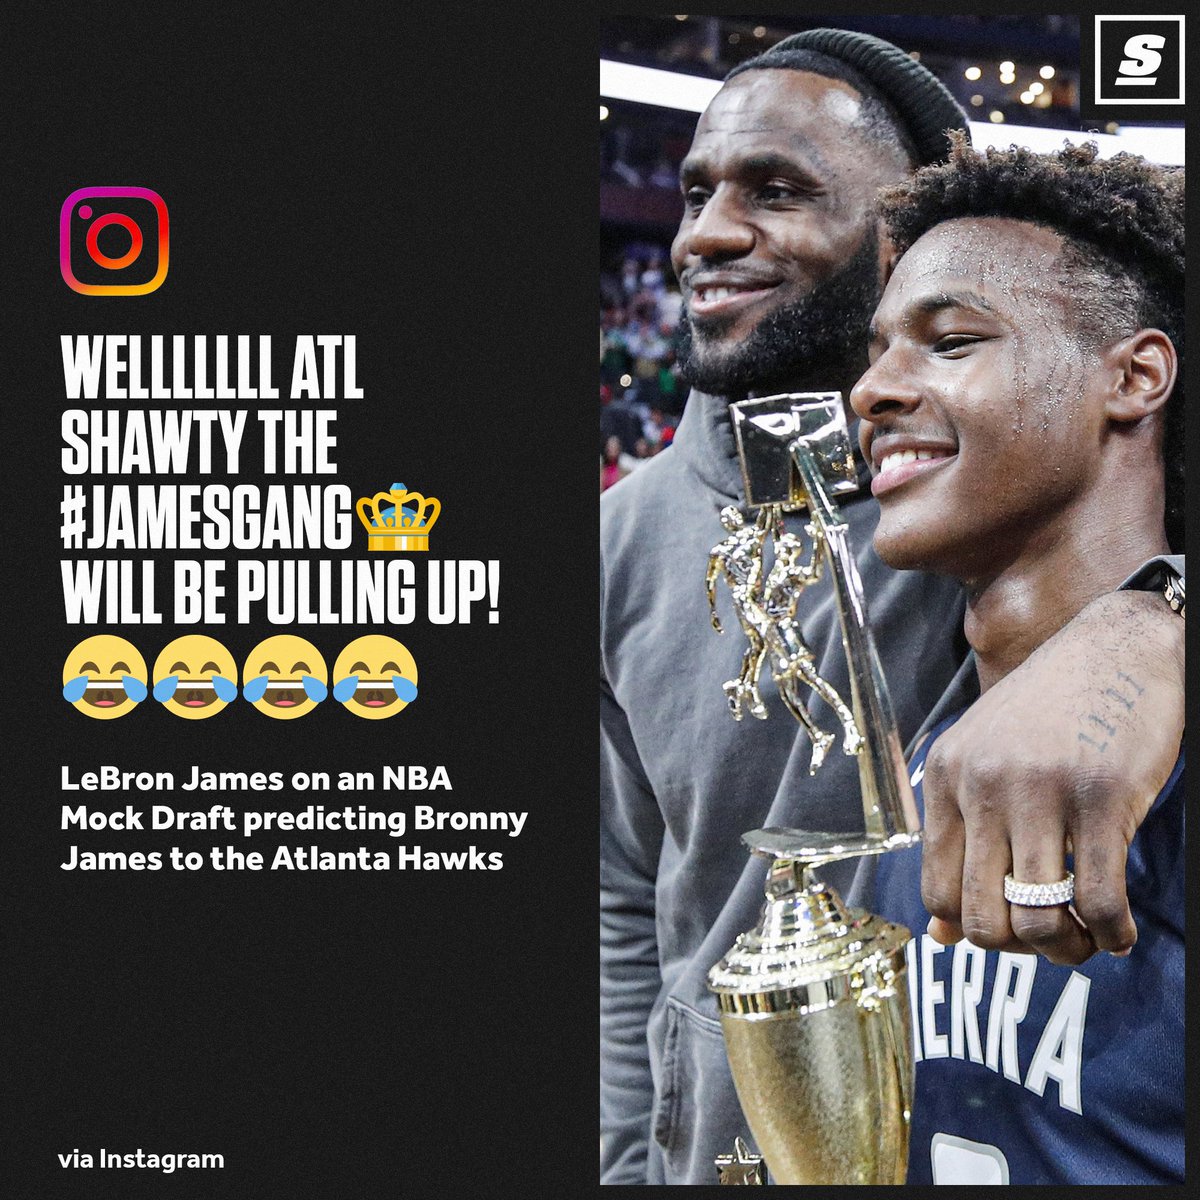 LeBron says if Bronny gets drafted to Atlanta, he'll pull up. 😅